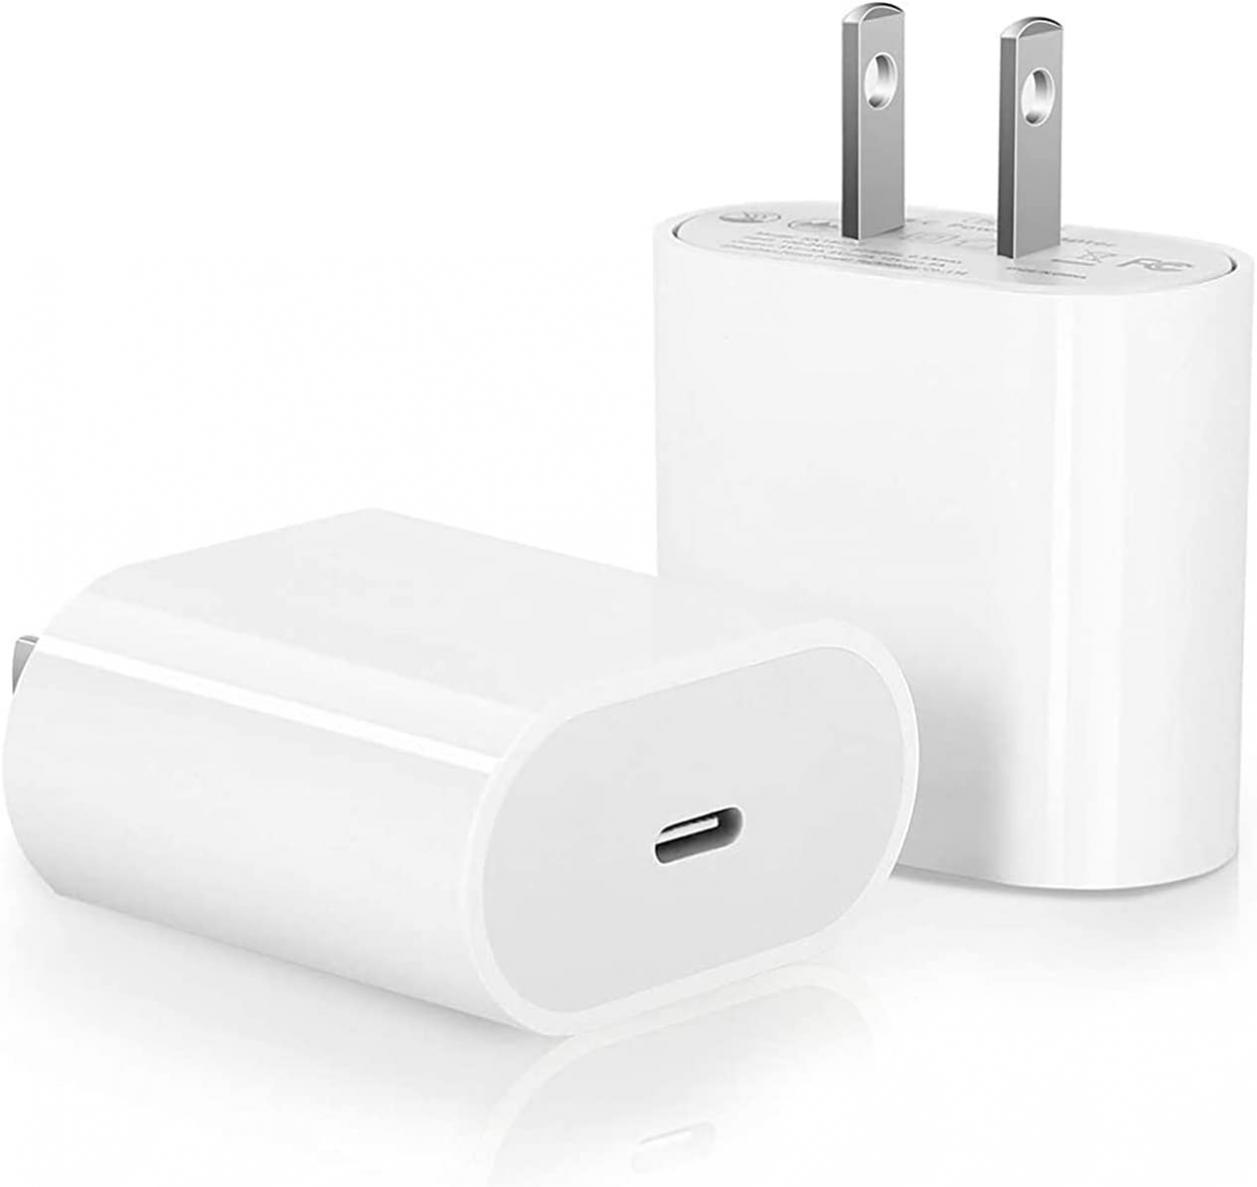 iPhone Fast Charger Block, IPREMIUM 2-Pack 20W USB C Wall Cube Charger PD 3.0 Power Adapter for iPhone 14/14 Pro/14 Pro Max/14 Plus/13/13 Pro Max/ 13 Pro/ 12/12 Pro Max/11/Xr/X, iPad Pro, AirPods Pro